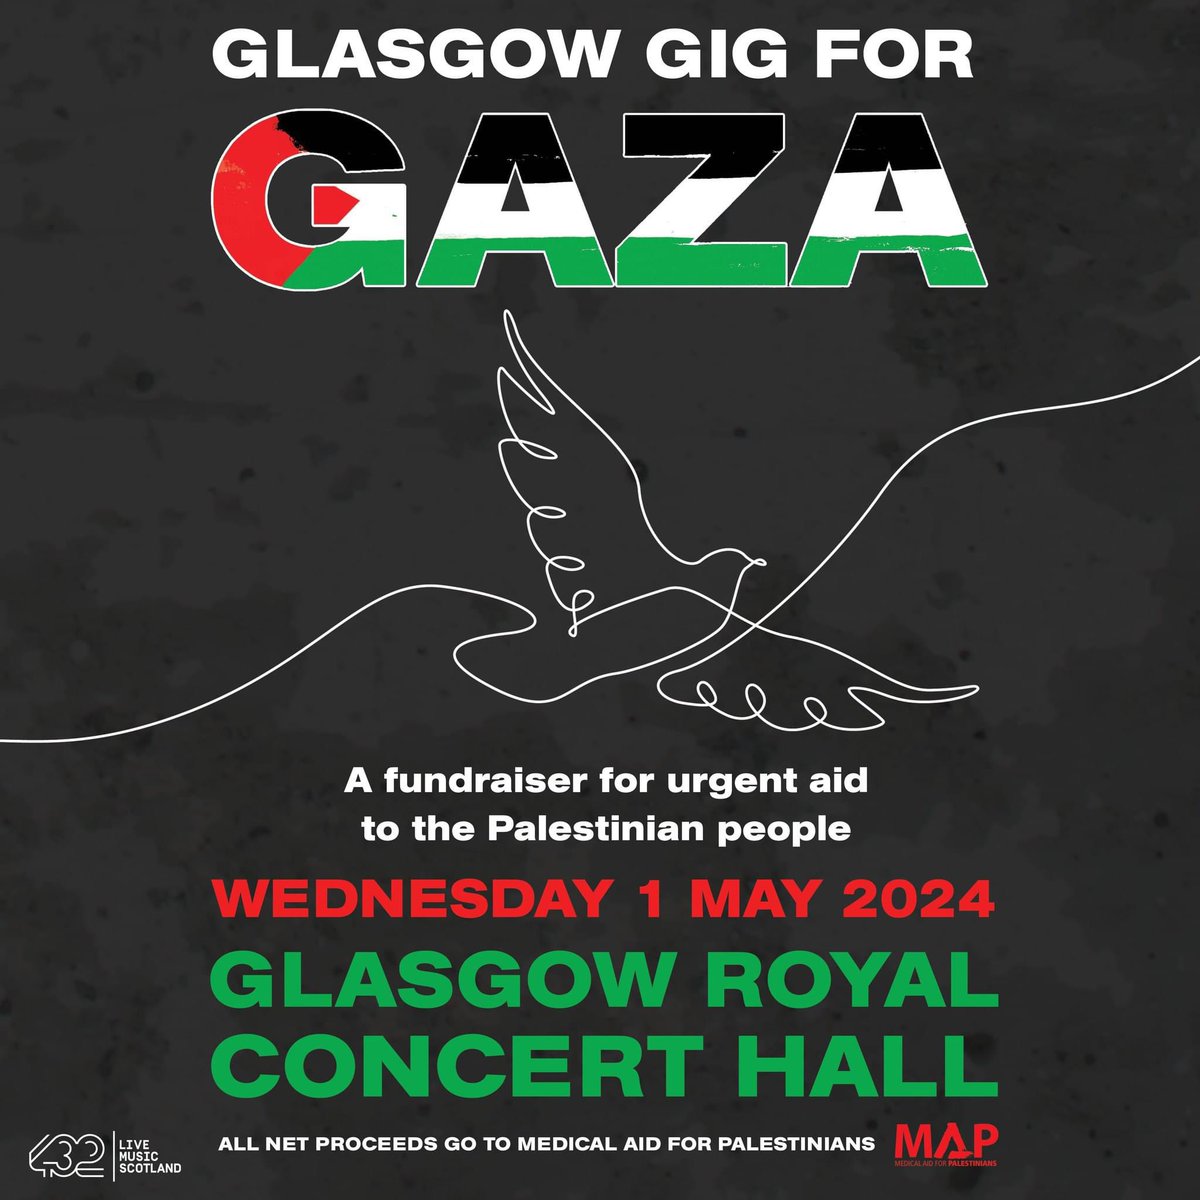 We'll be performing a set at the Glasgow Gig for Gaza, a fundraiser supporting the charity @MedicalAidPal at the Glasgow Royal Concert Hall on Wednesday 1st May. Tickets are on sale now here: tickets.glasgowlife.org.uk/33110/33111